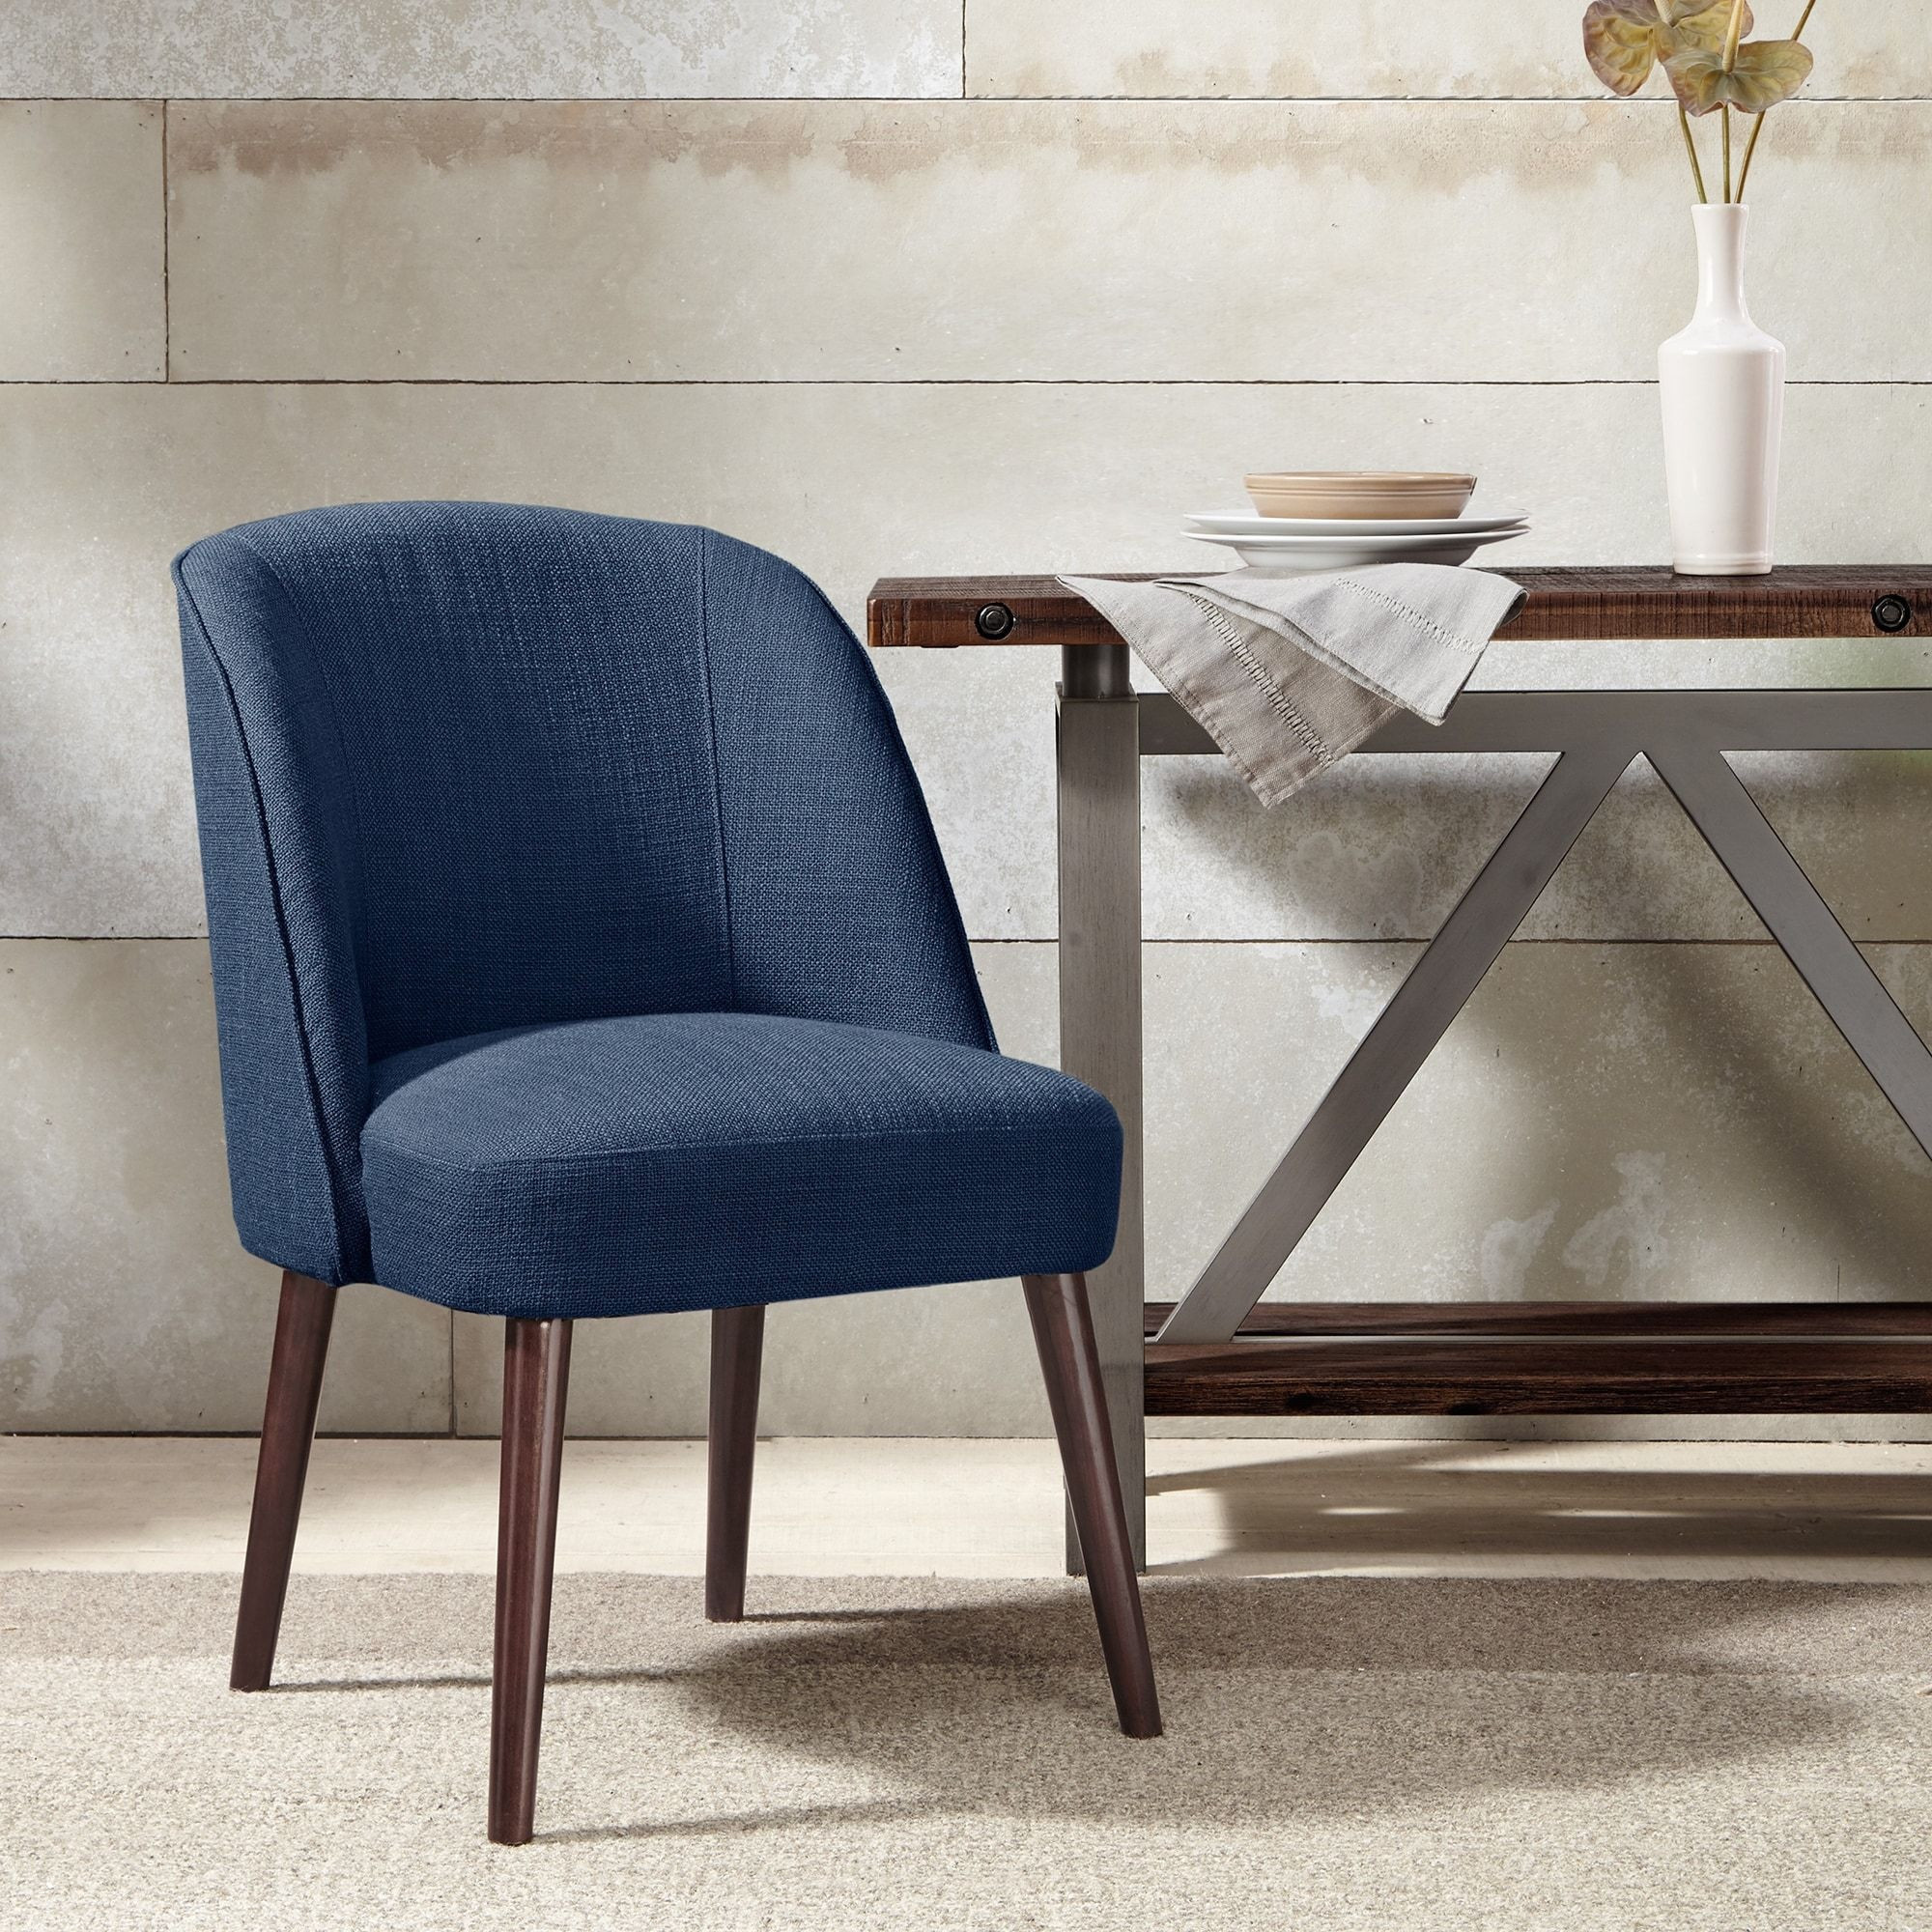 blue velvet accent chair incredibly luxury tufted dining chairs for navy table with intended small modern room sets decorative wine rack york furniture sofa set bangalore heavy